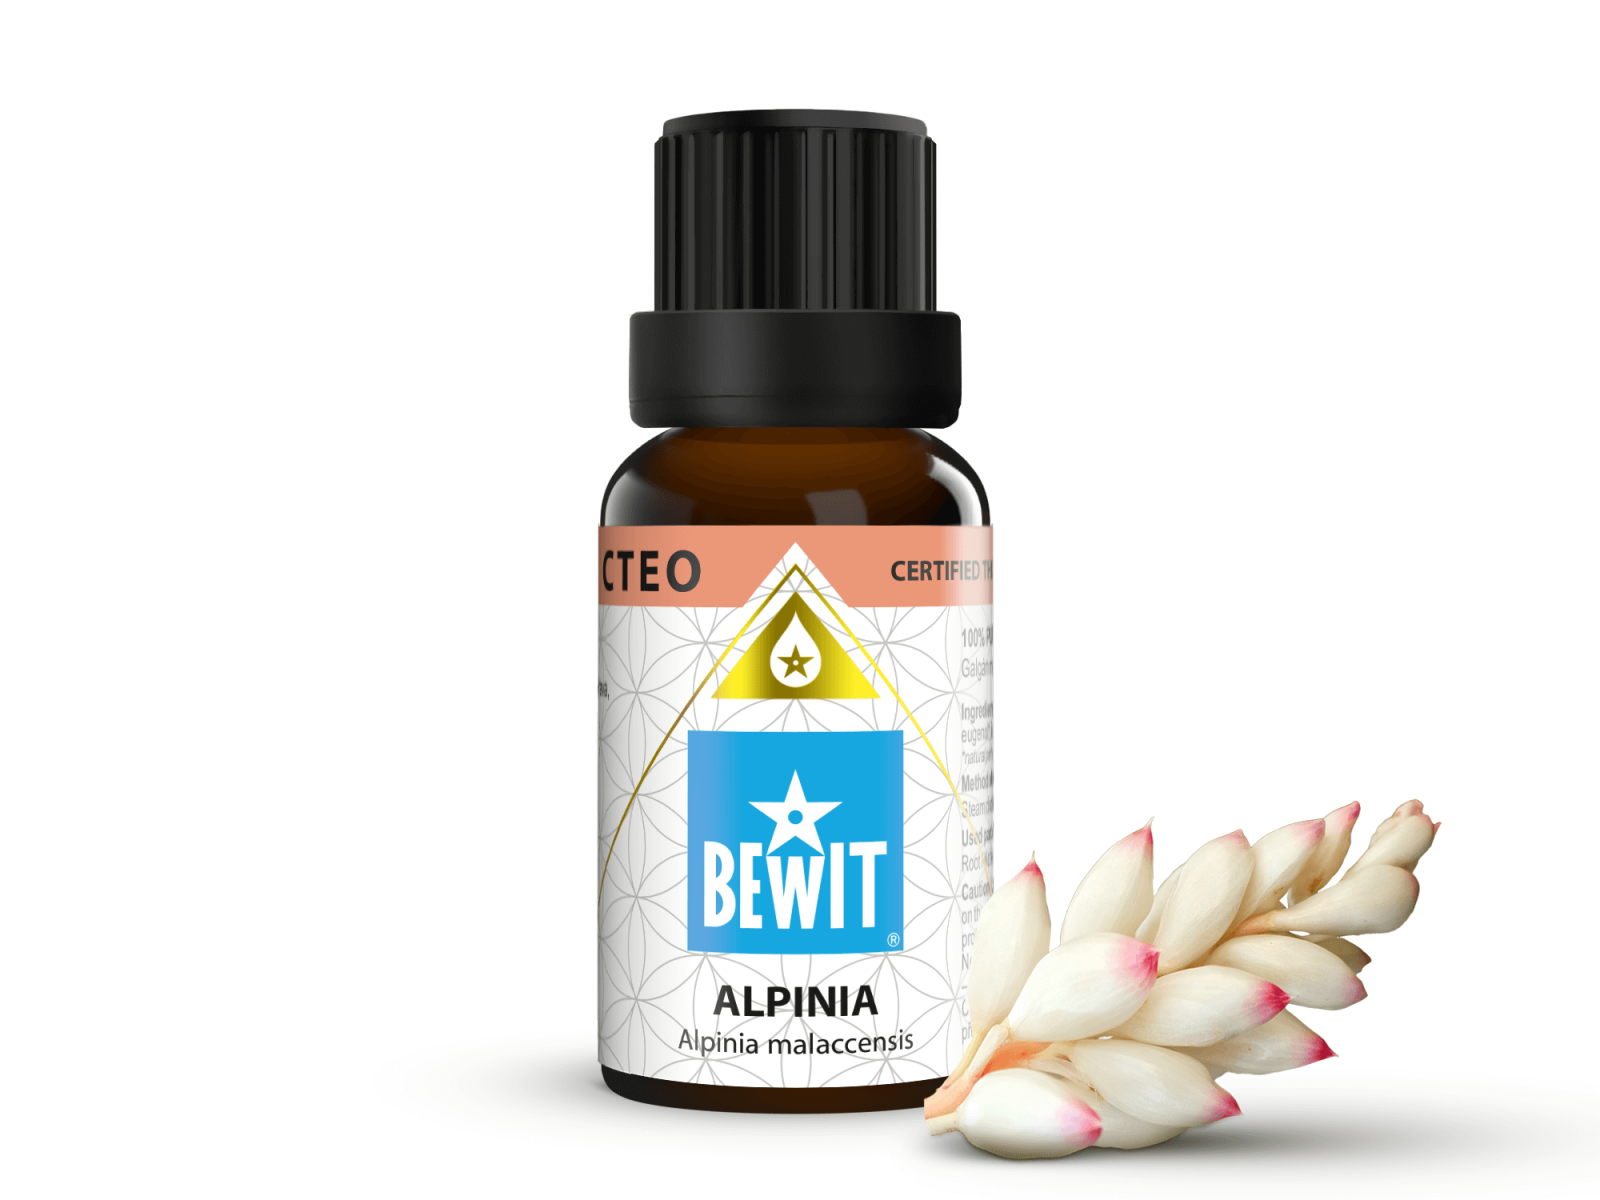 BEWIT Alpinia - 100% pure and natural CTEO® essential oil - 1